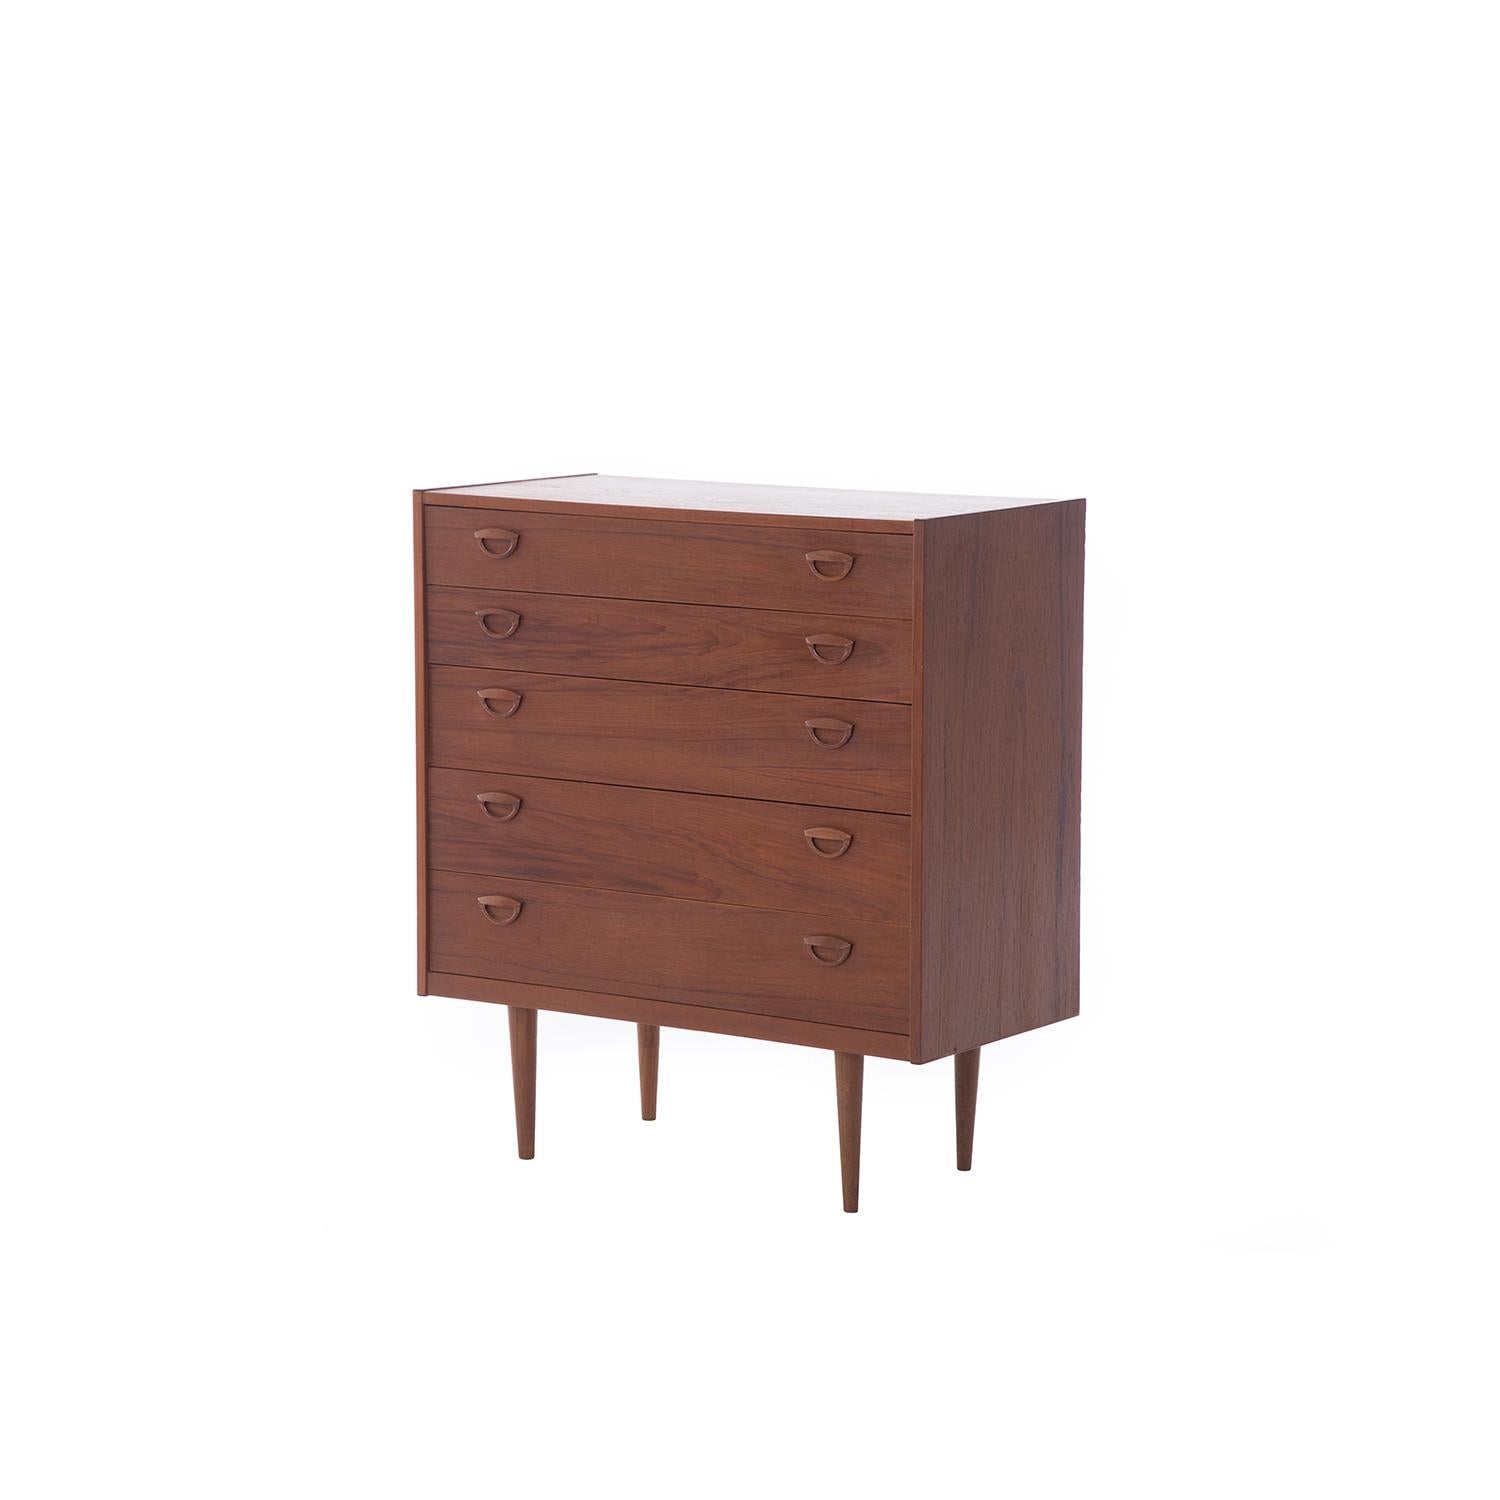 This is a classic mid-century Scandinavian teak drawer chest designed y Kai Kristiansen. Five drawers with sculptural finger pulls. Top and second drawer are 4